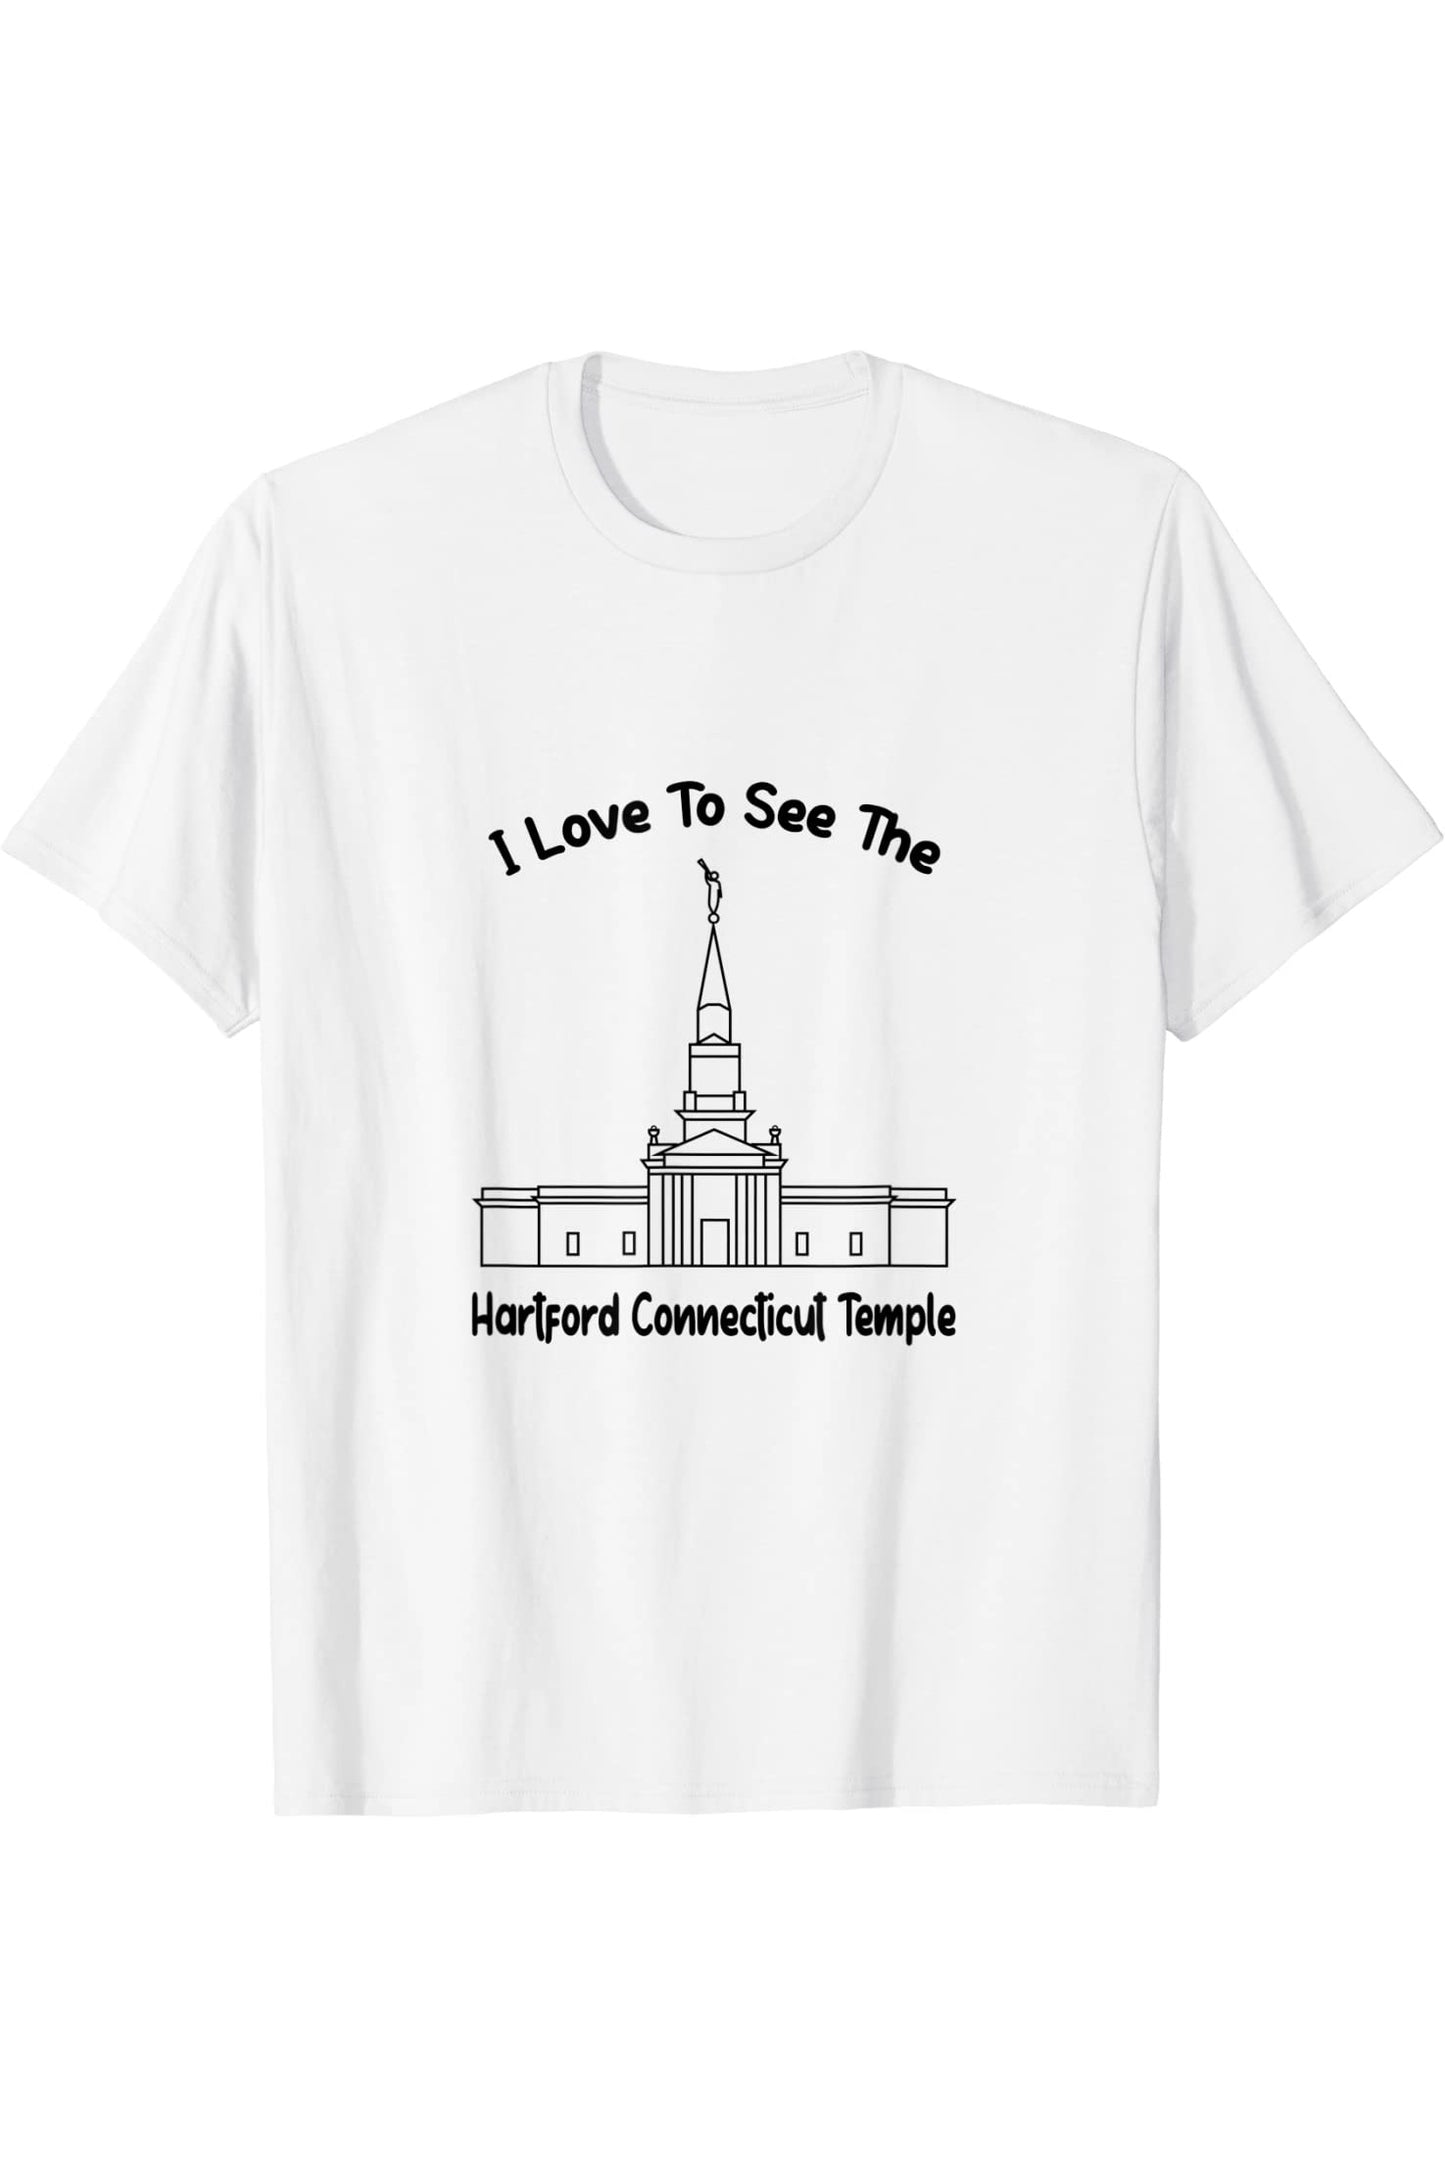 Hartford Connecticut Temple T-Shirt - Primary Style (English) US